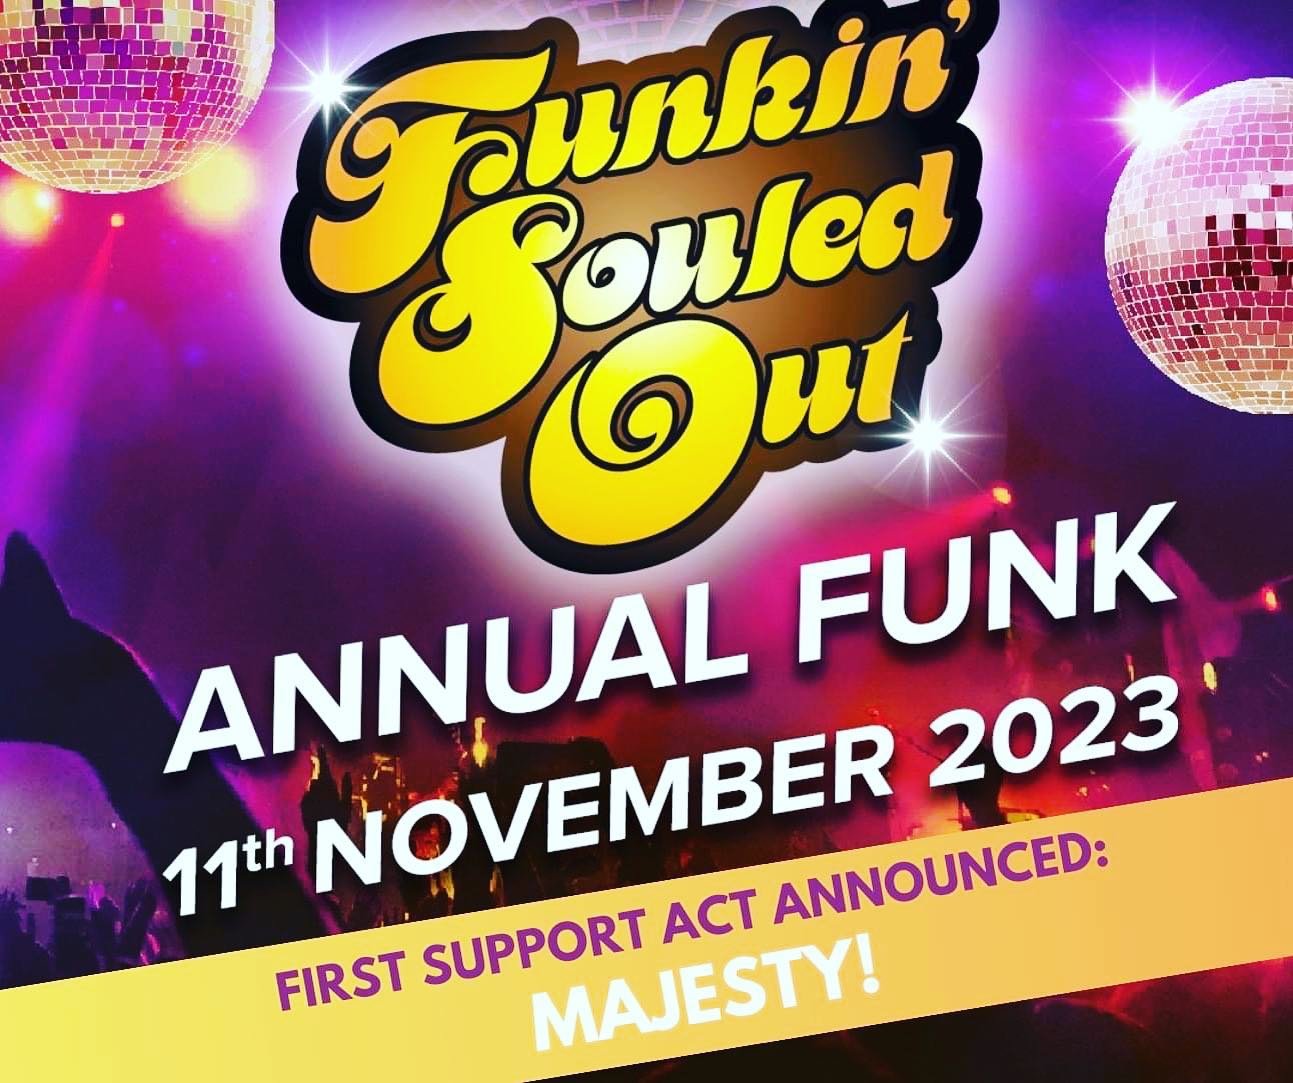 Excited to reveal the first support act joining us on 11th November!  Fresh from Marlow's Battle of the Bands, and a sold out performance at The Duke, MAJESTY!  Tickets are selling fast - thanks funksters!  Move quick and grab yours here using promo 